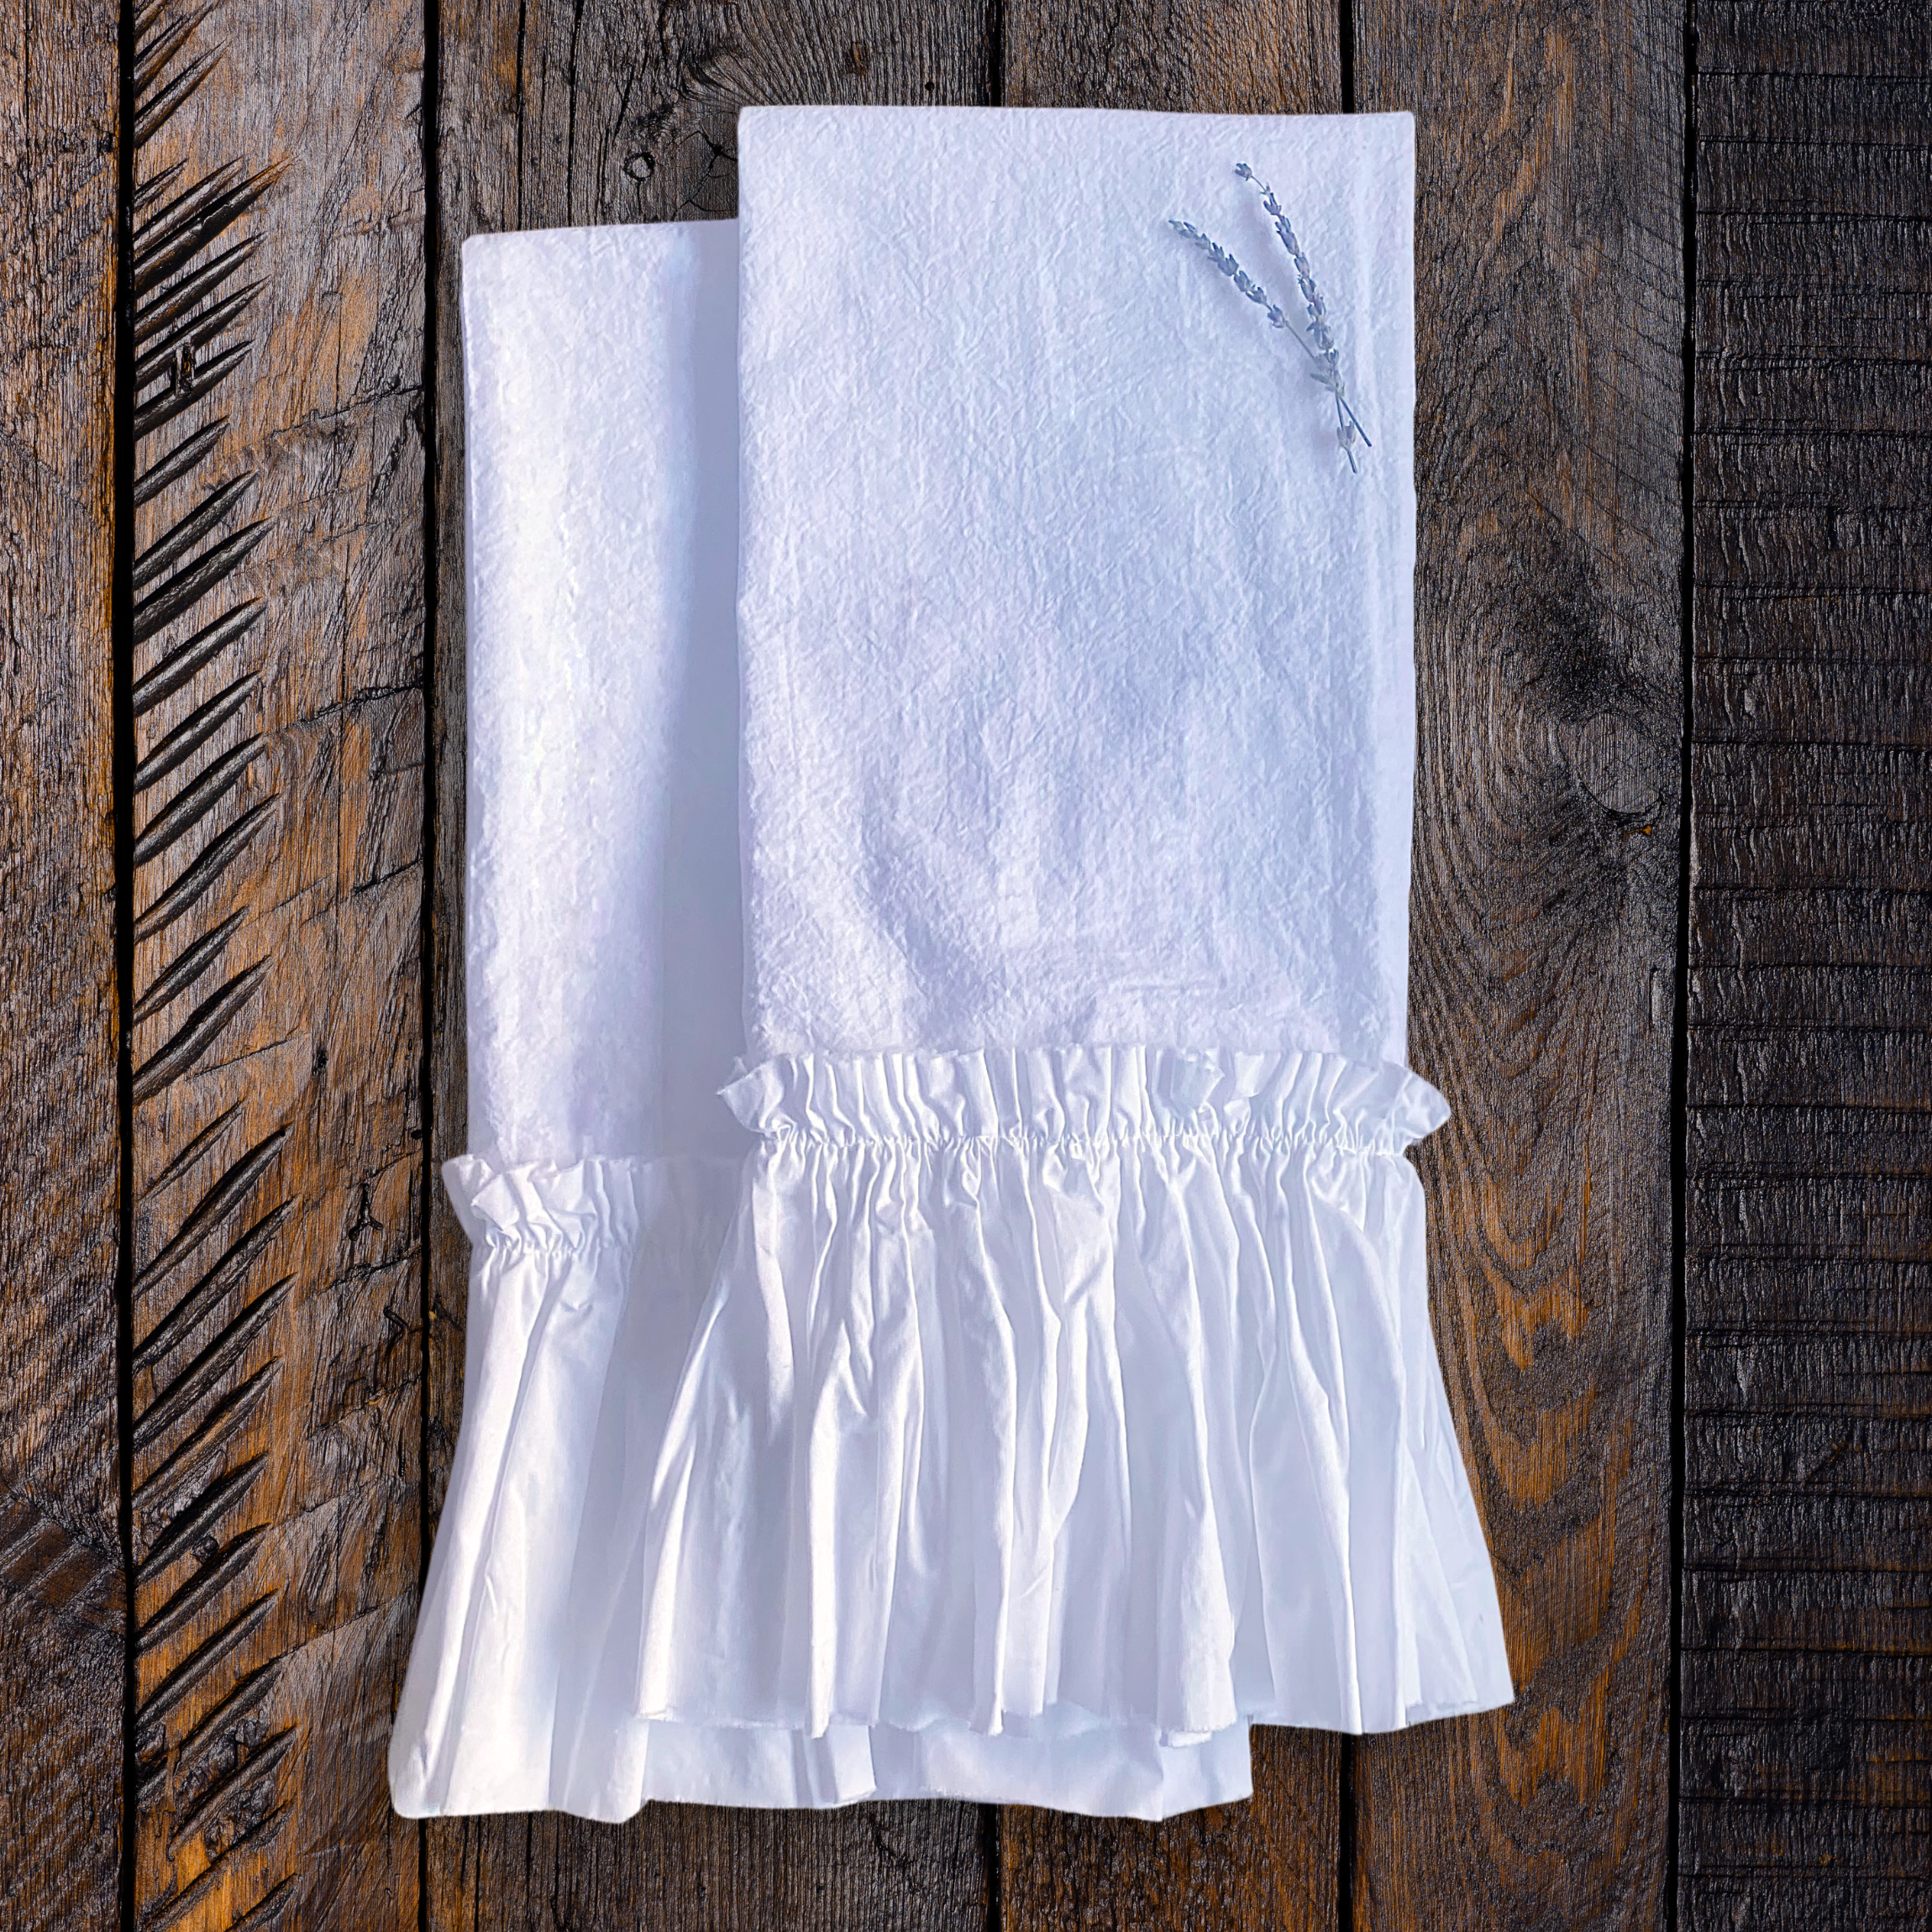 Set of Two Shabby Chic White Ruffled Tea Towels